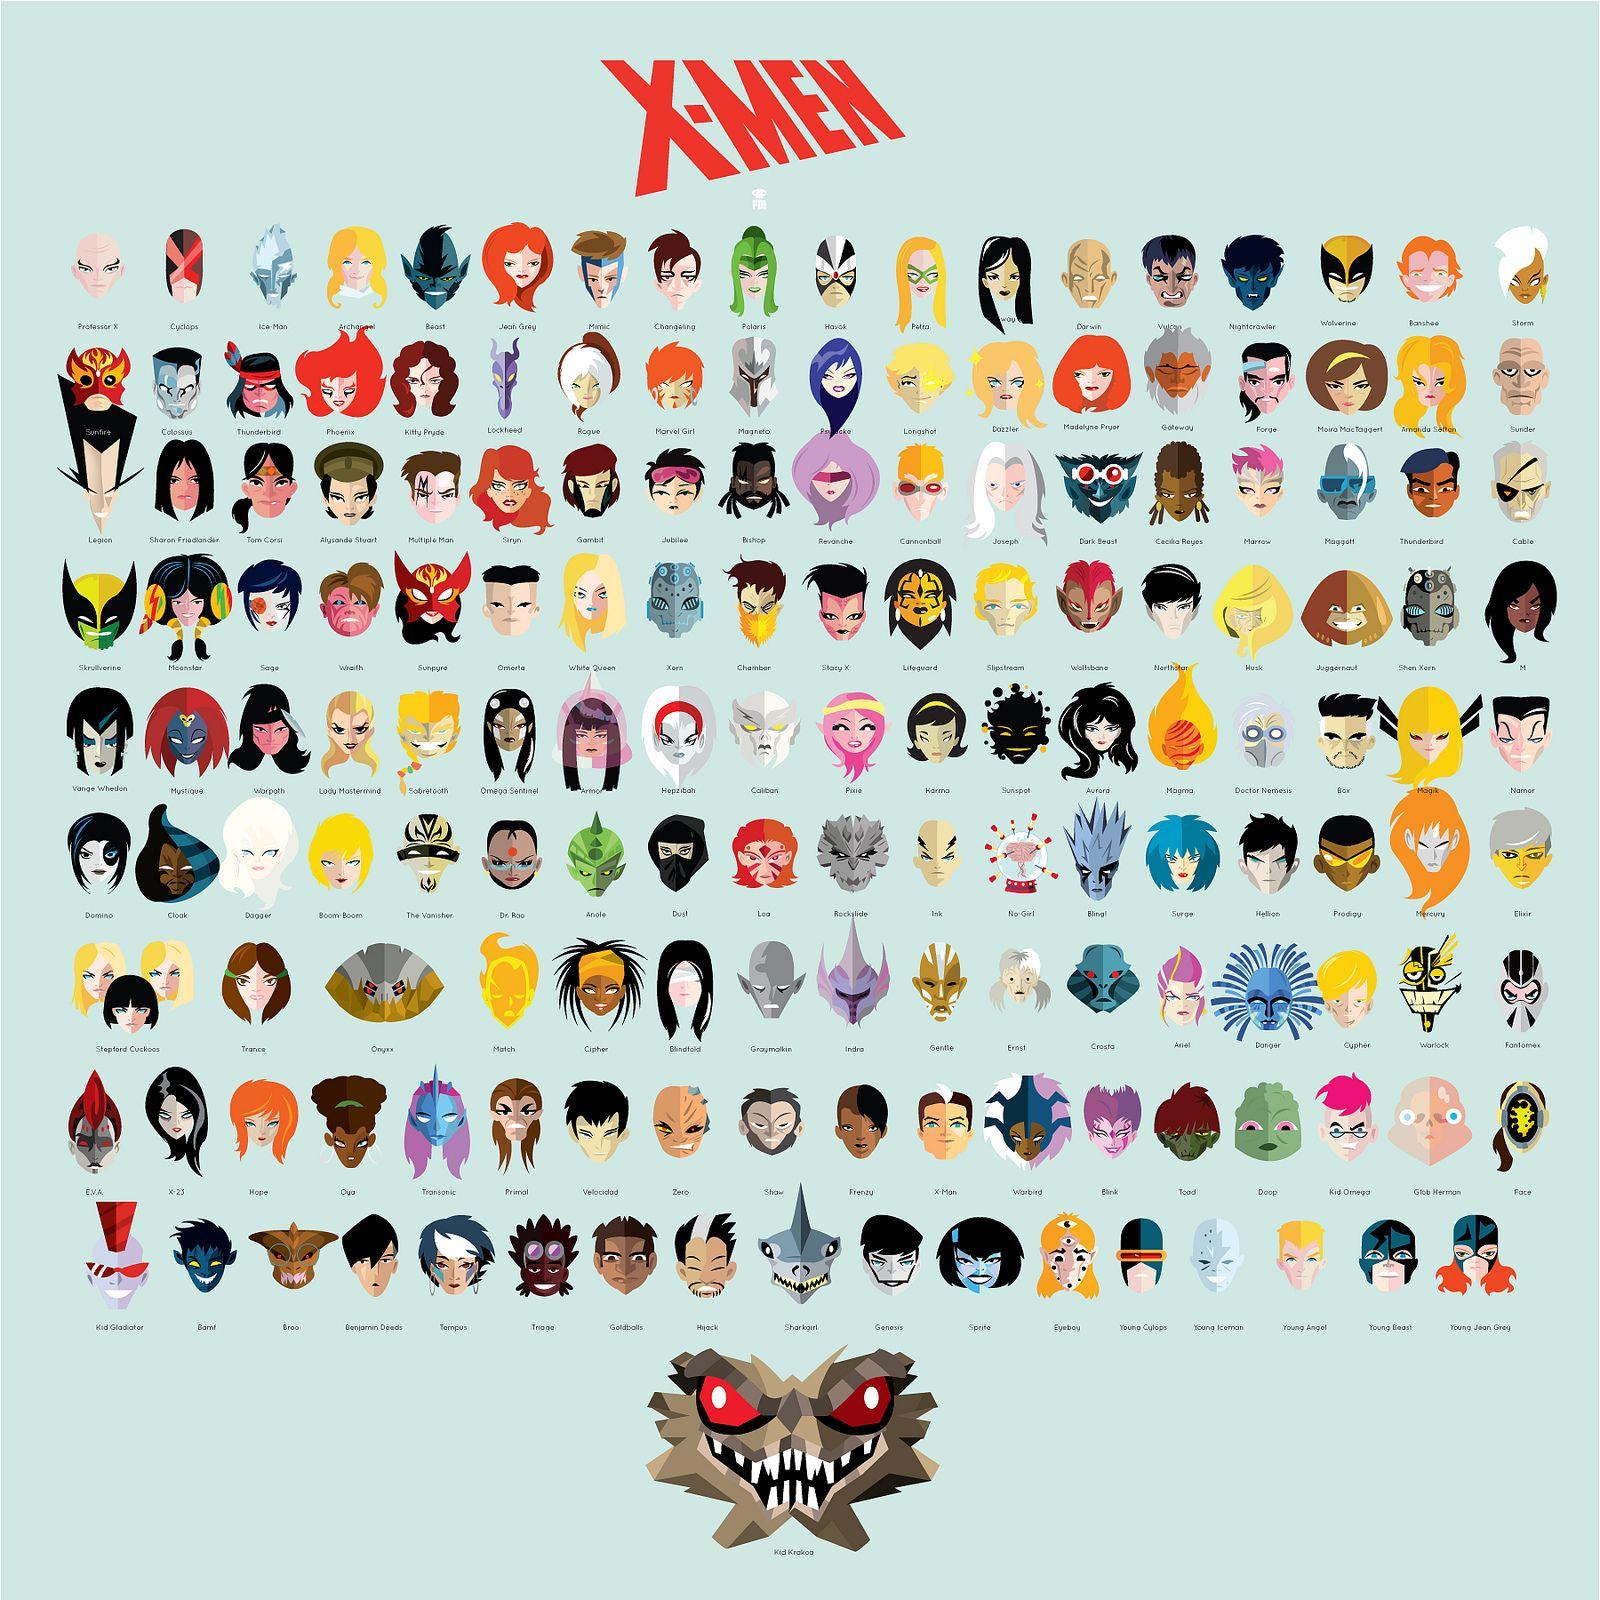 All the X-Men Superhero Logo - Stylized Illustration Featuring the Faces of X-Men Superheroes ...